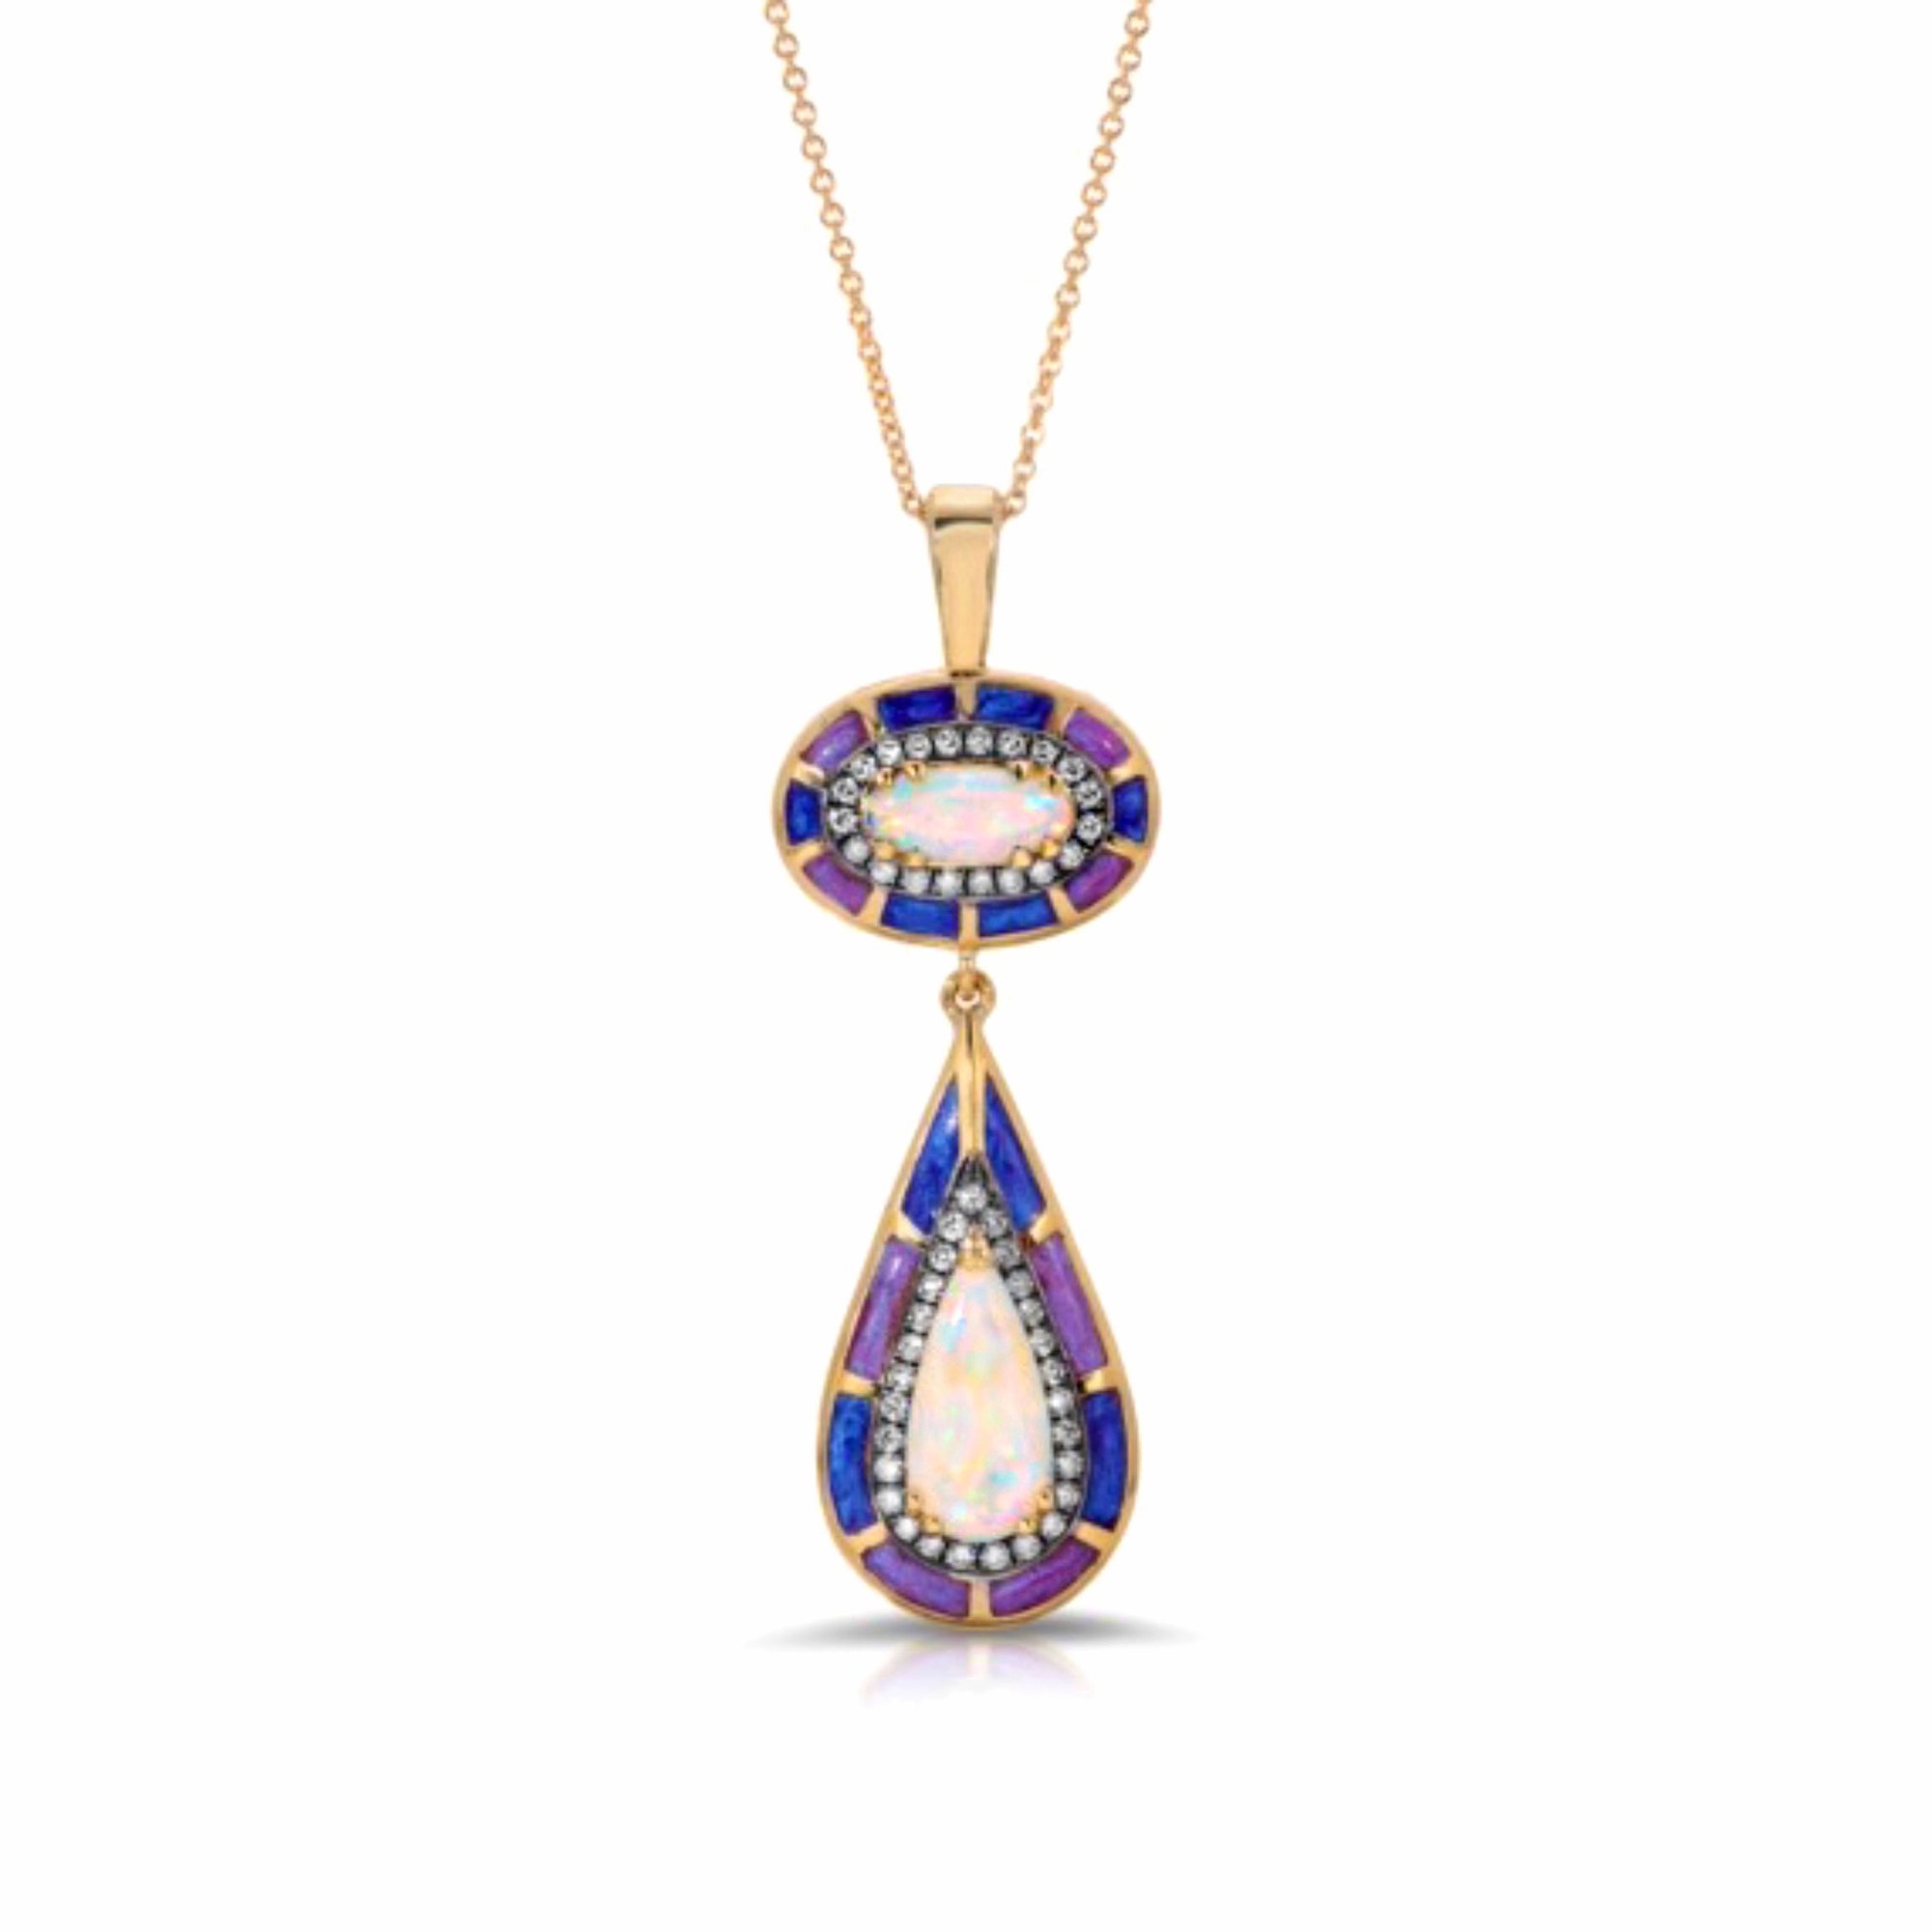 Opal Drop Enamel Pendant Necklace by Lord Jewelry available at Talisman Collection Fine Jewelers in El Dorado Hills, CA and online. Experience the magic of opals combined with exquisite craftsmanship. This double opal drop pendant necklace features 1.29 cts of stunning cabochon opals, artistically surrounded by vibrant blue and purple enamel. The opals are accentuated by 0.34 carats of diamonds, all set in 18K yellow gold. Be prepared to receive compliments wherever you go.